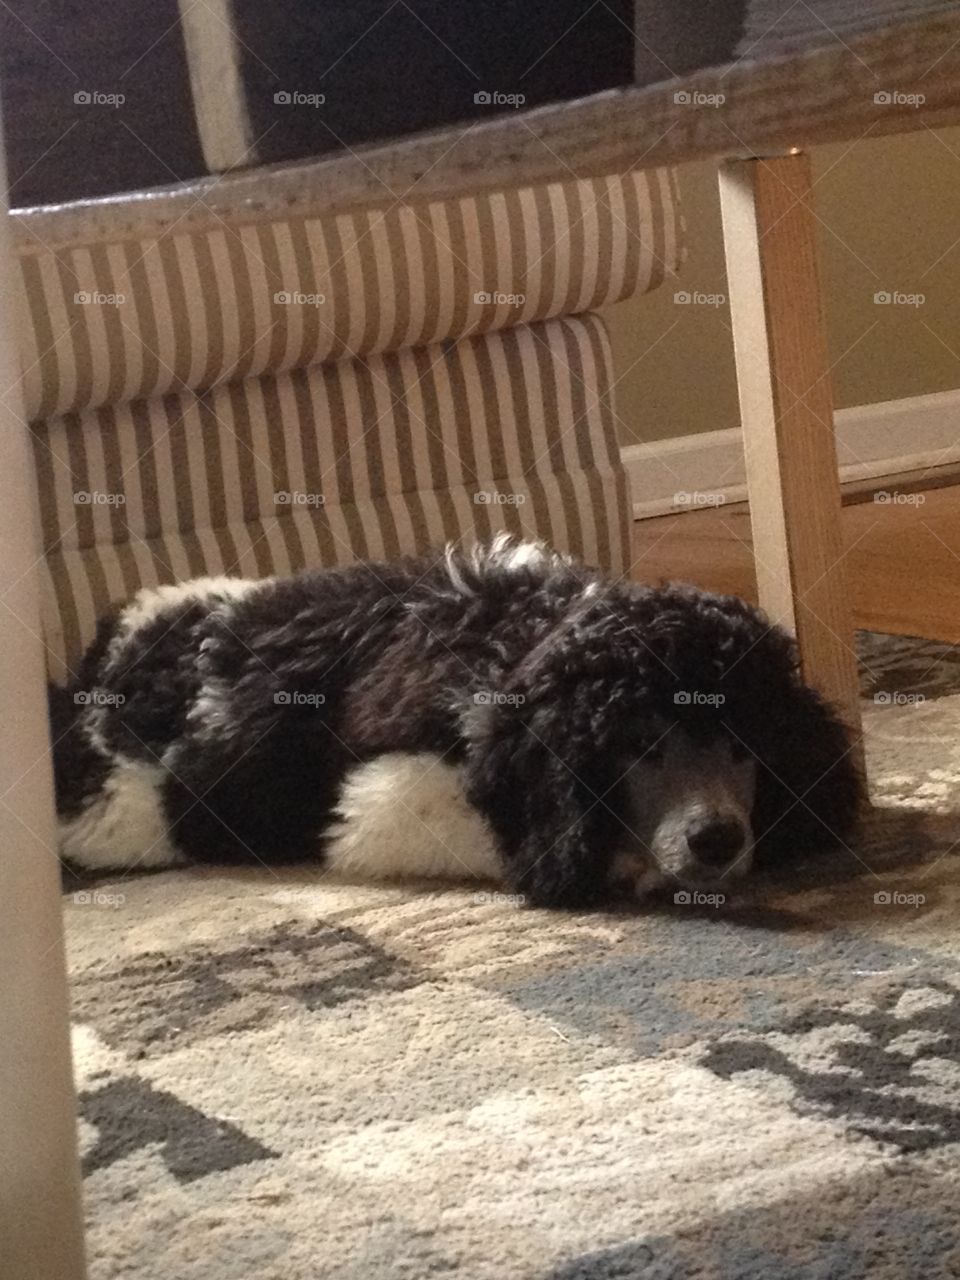 Standard poodle puppy napping on the floor. 